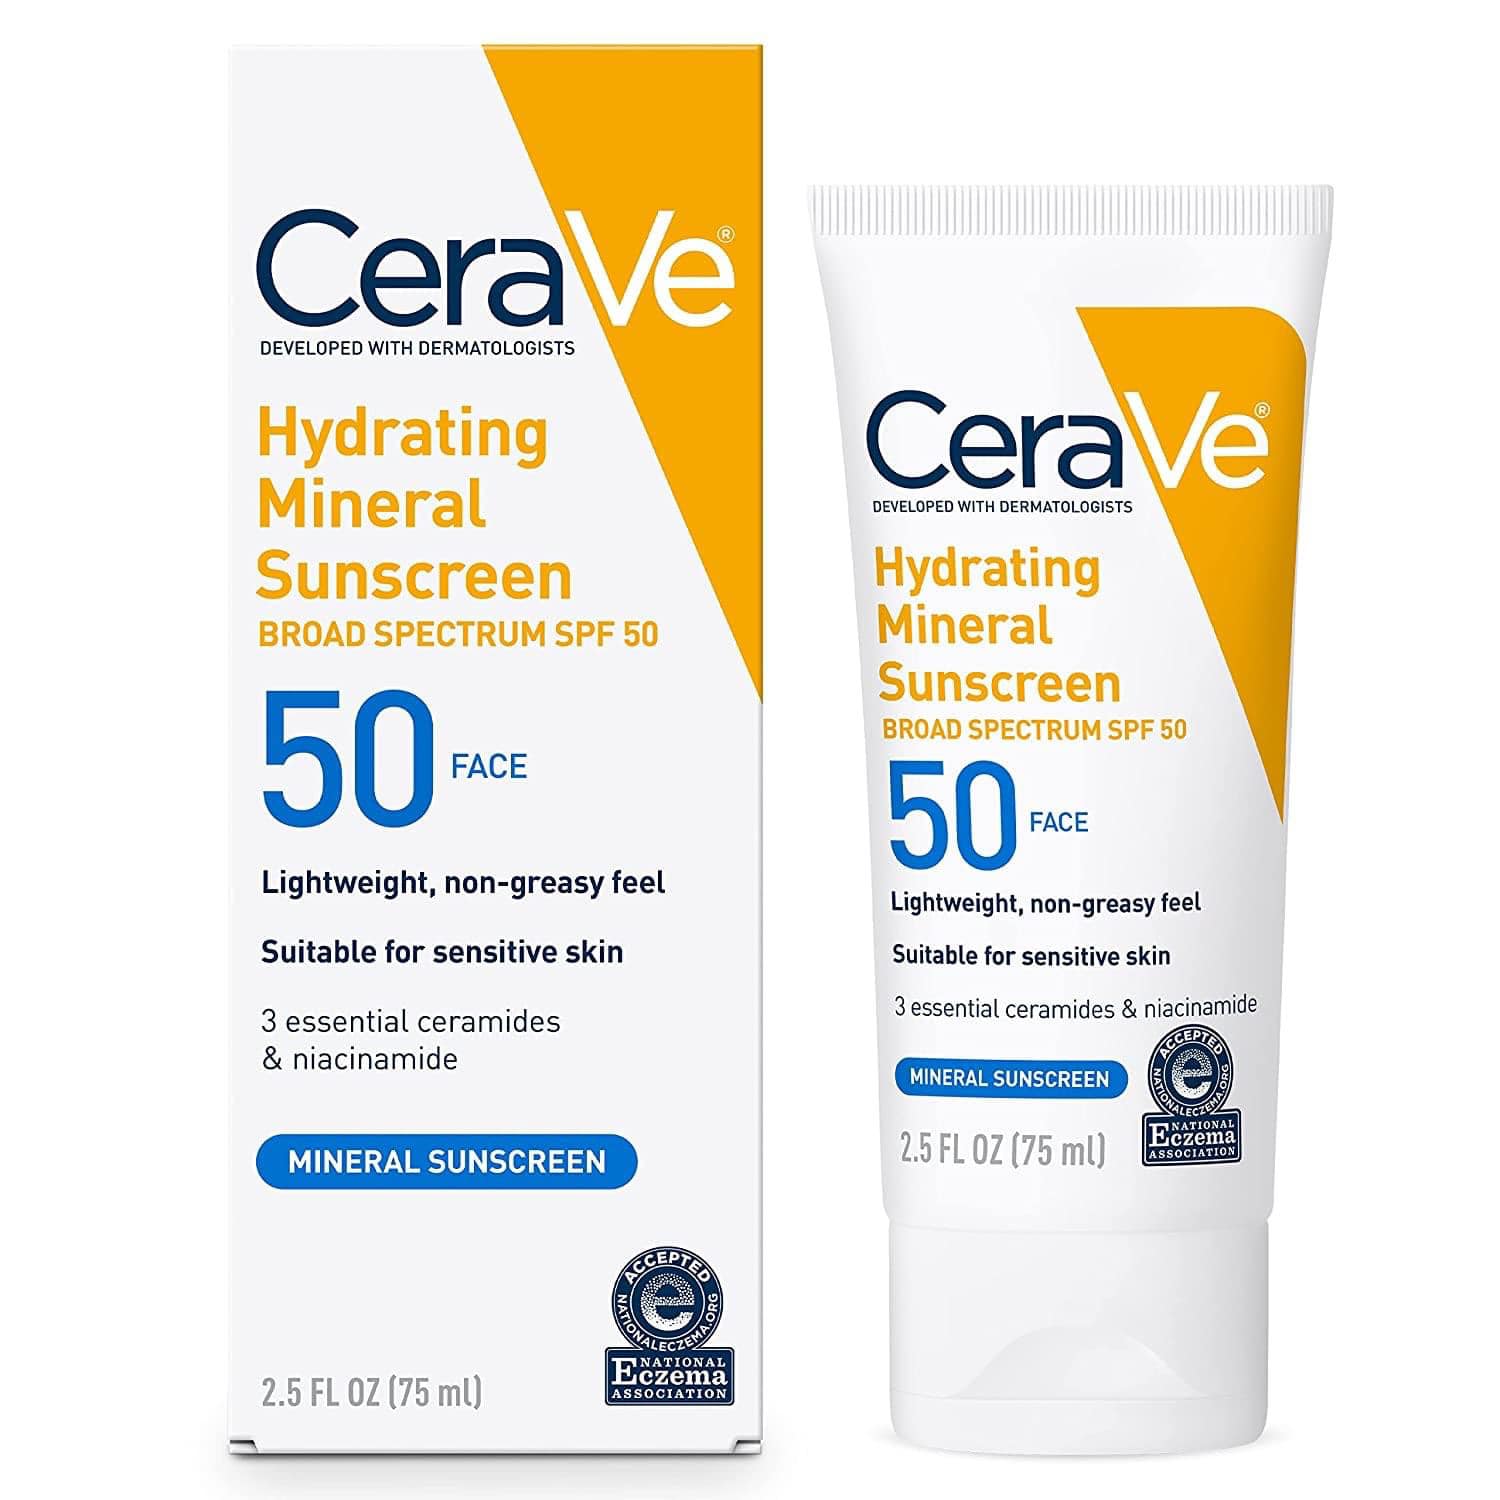 Cerave Haydrating Mineral Sunscreen Broad Spectrum Spf 30 Face 75Ml